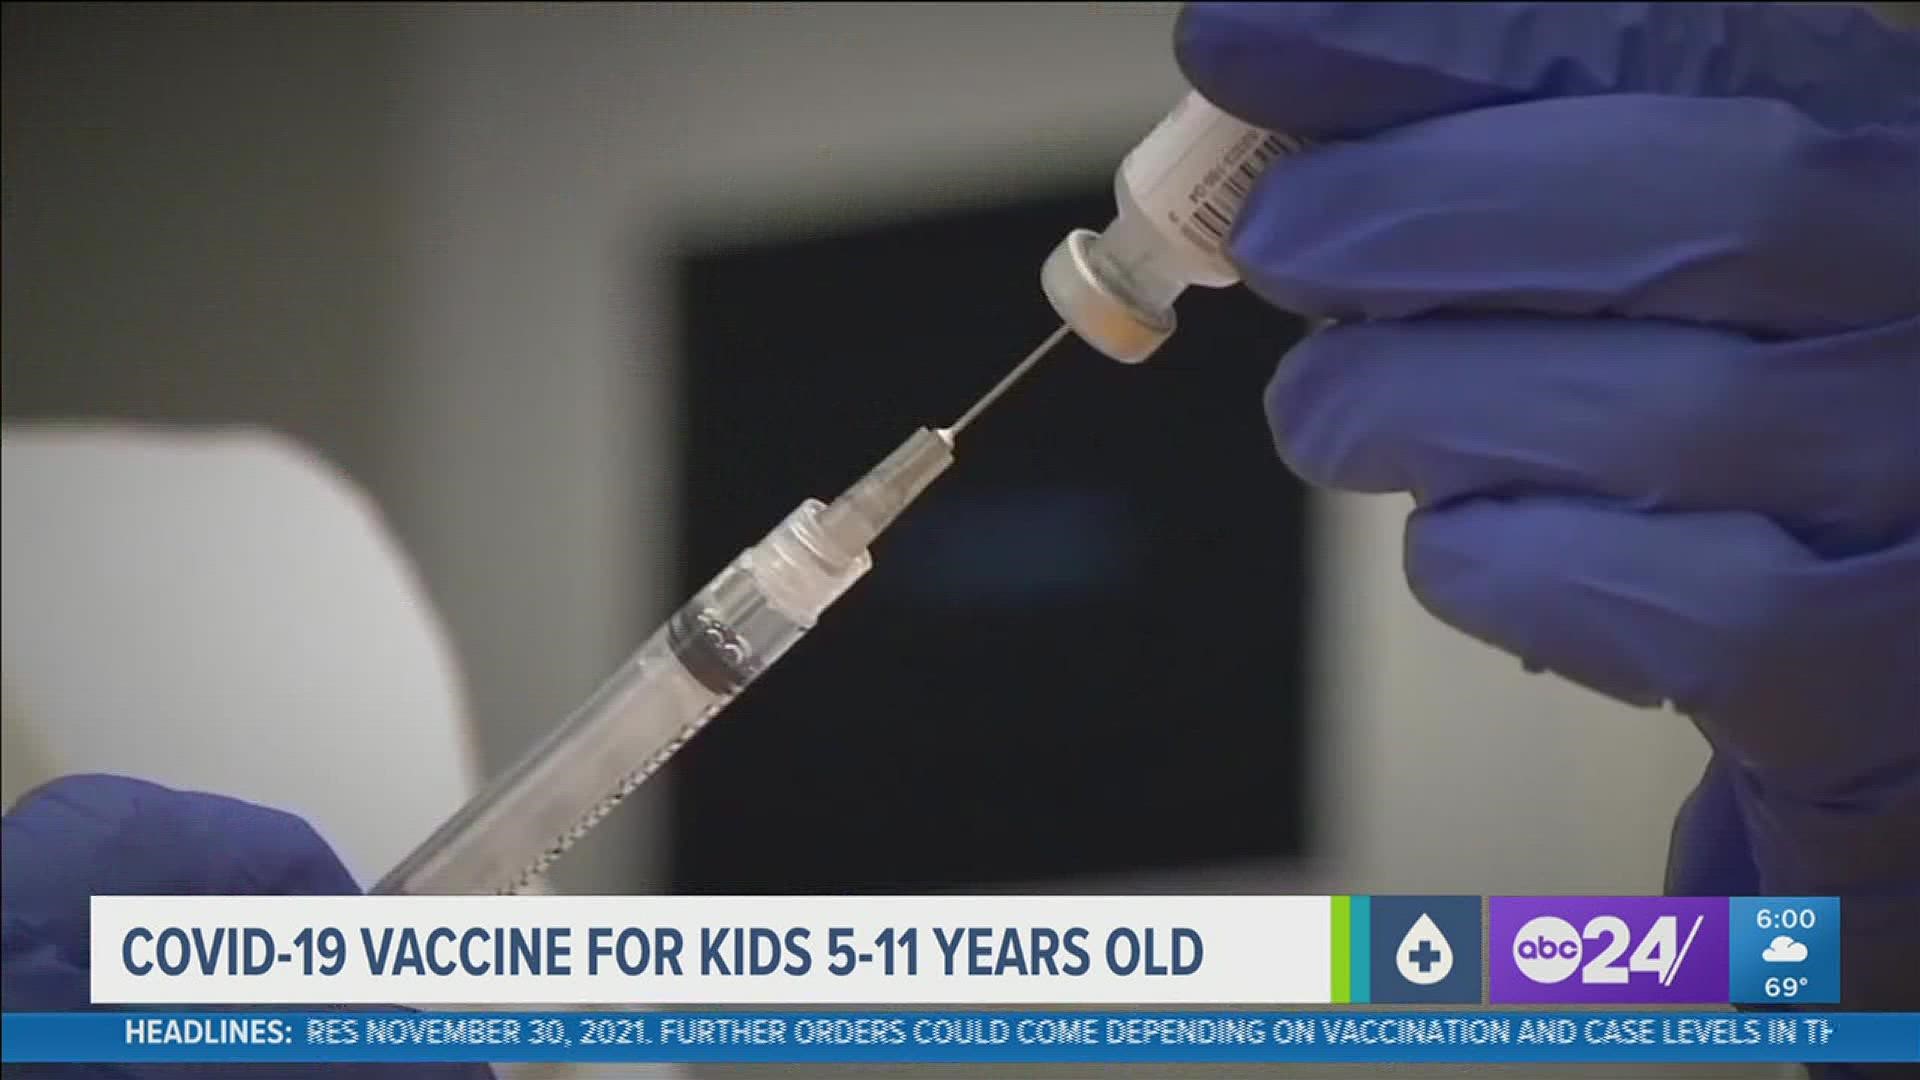 With final approval likely in the coming weeks, it would make 28 million children, and about 100,000 in Shelby County, in that age group eligible for vaccination.